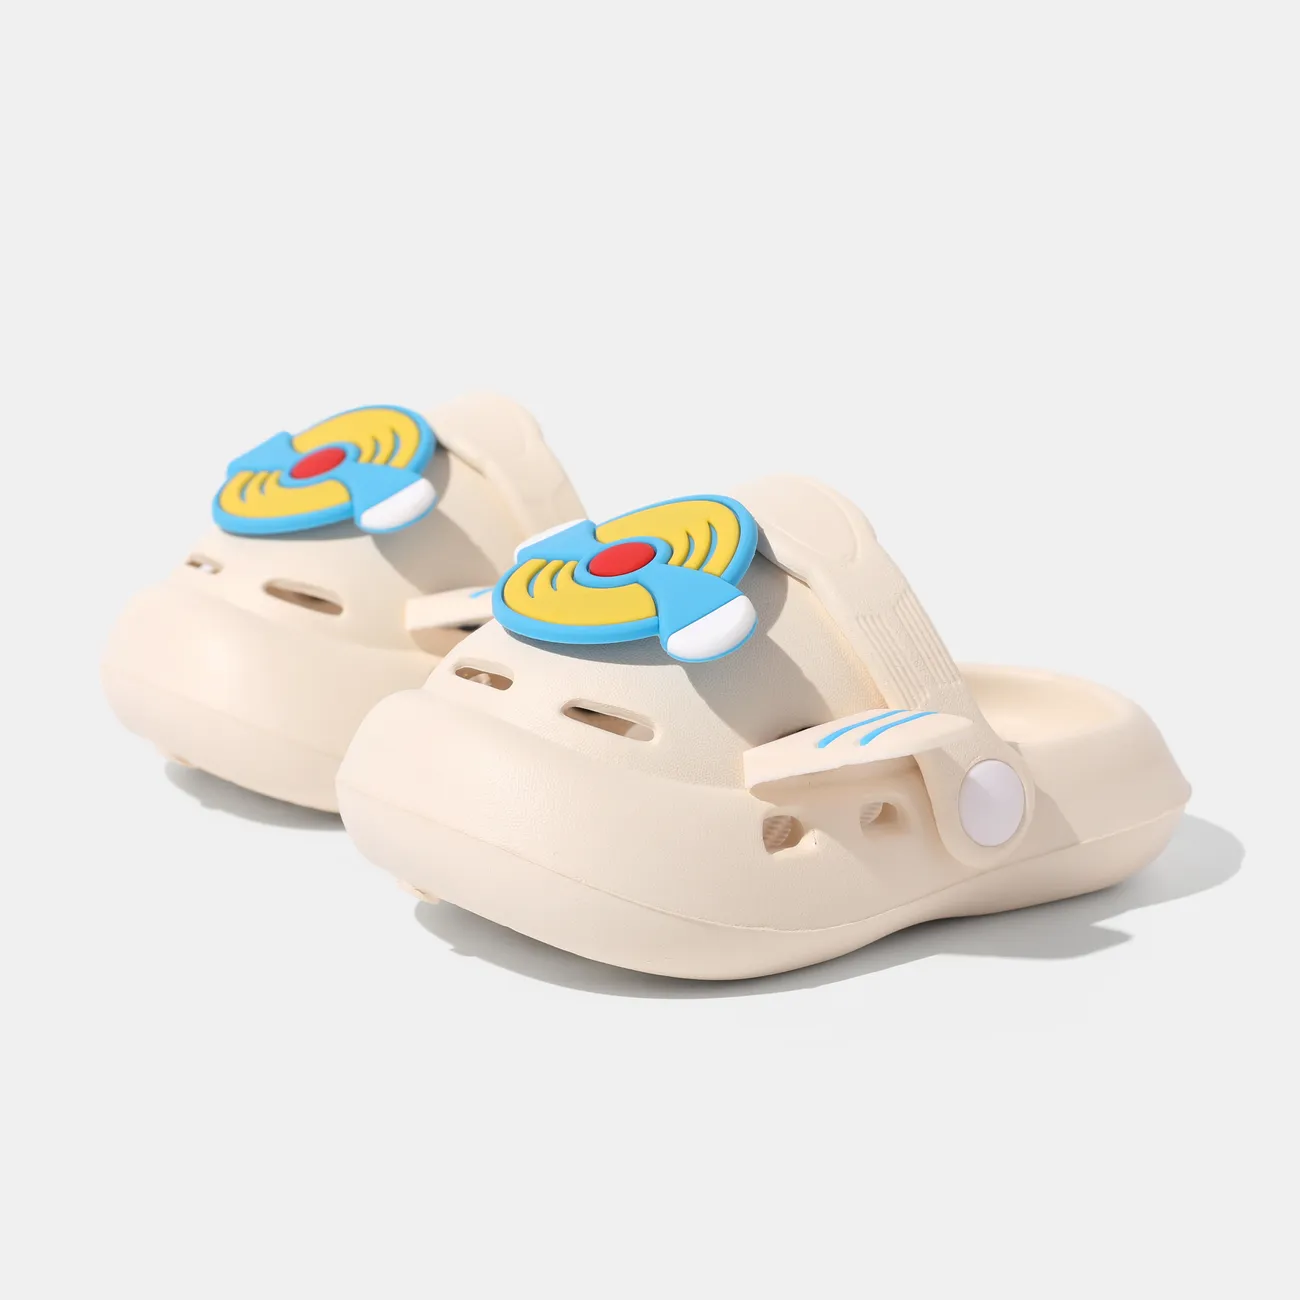 Toddler/Kids Girl/Boy Solid Color 3D Airplane Theme Hole Shoes  White big image 1